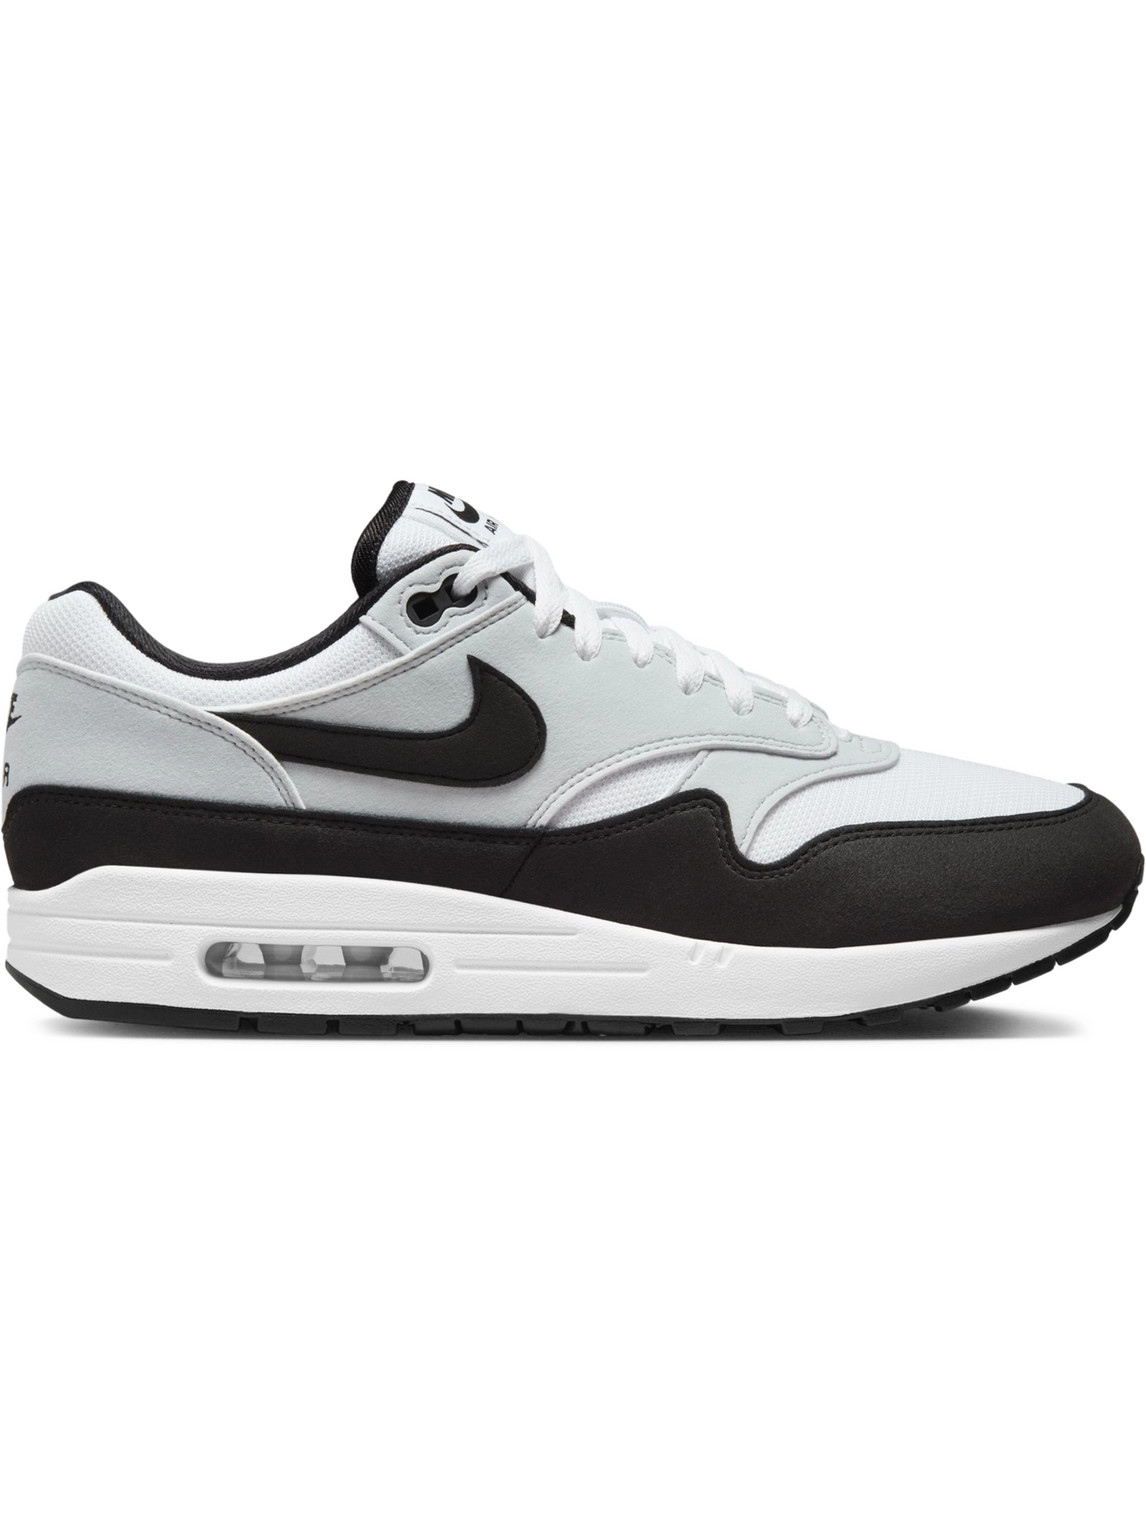 Air Max 1 Suede, Mesh and Leather Sneakers